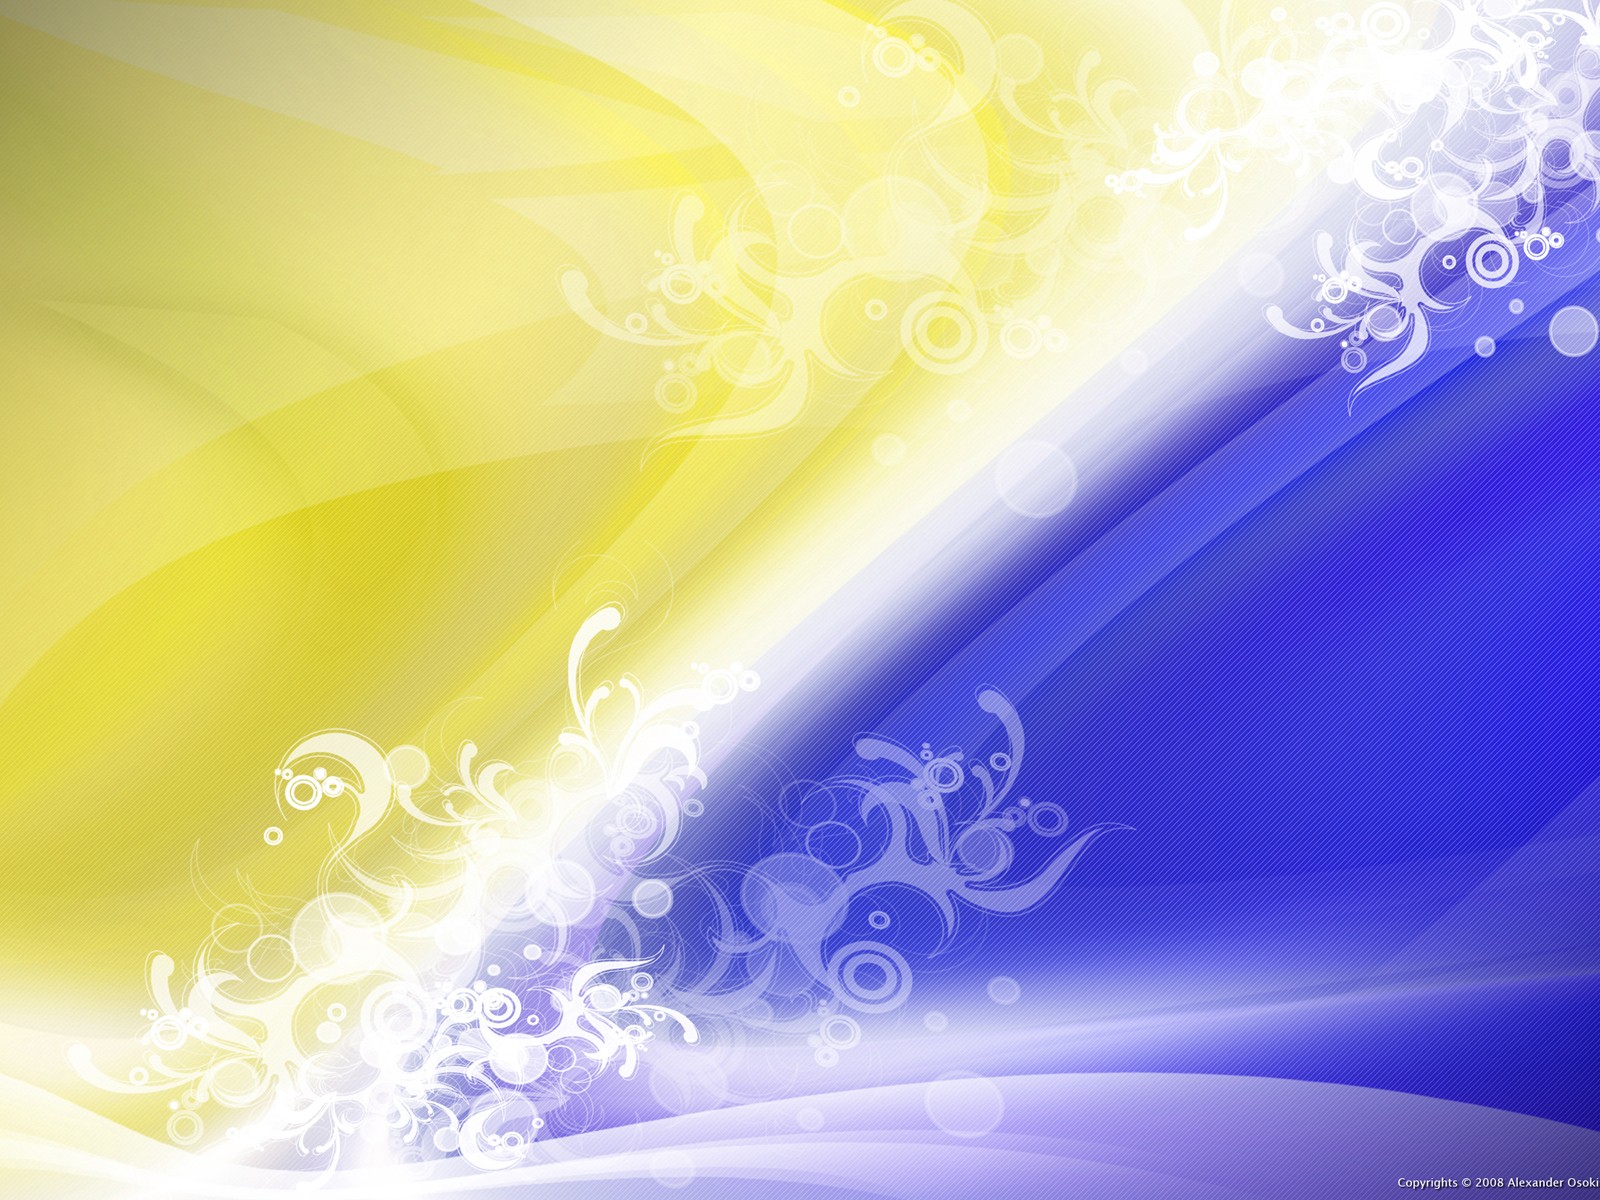 The Colorful Vision - Background Image In Mix Colour - HD Wallpaper 